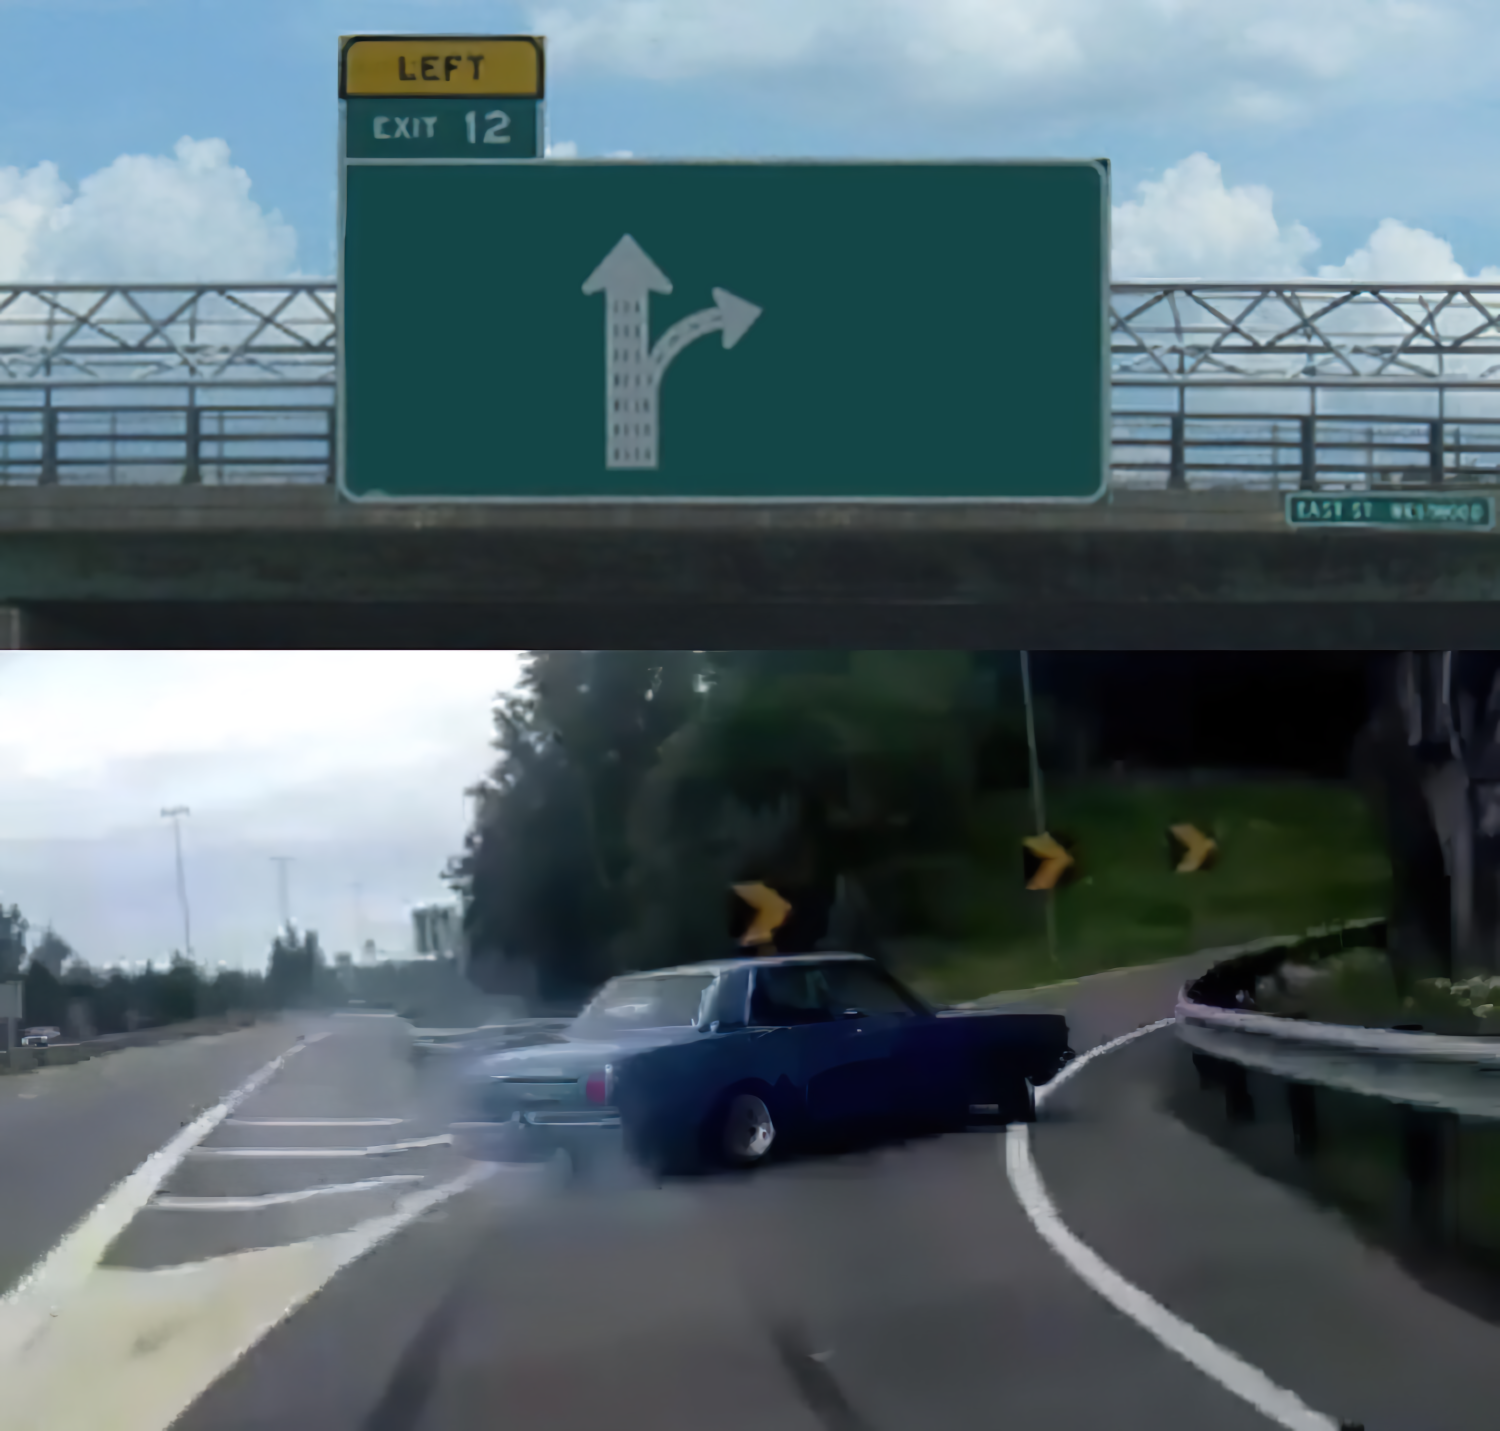 High Quality Left Exit 12 Off Ramp Hi-Res Noise-Reduced Blank Meme Template